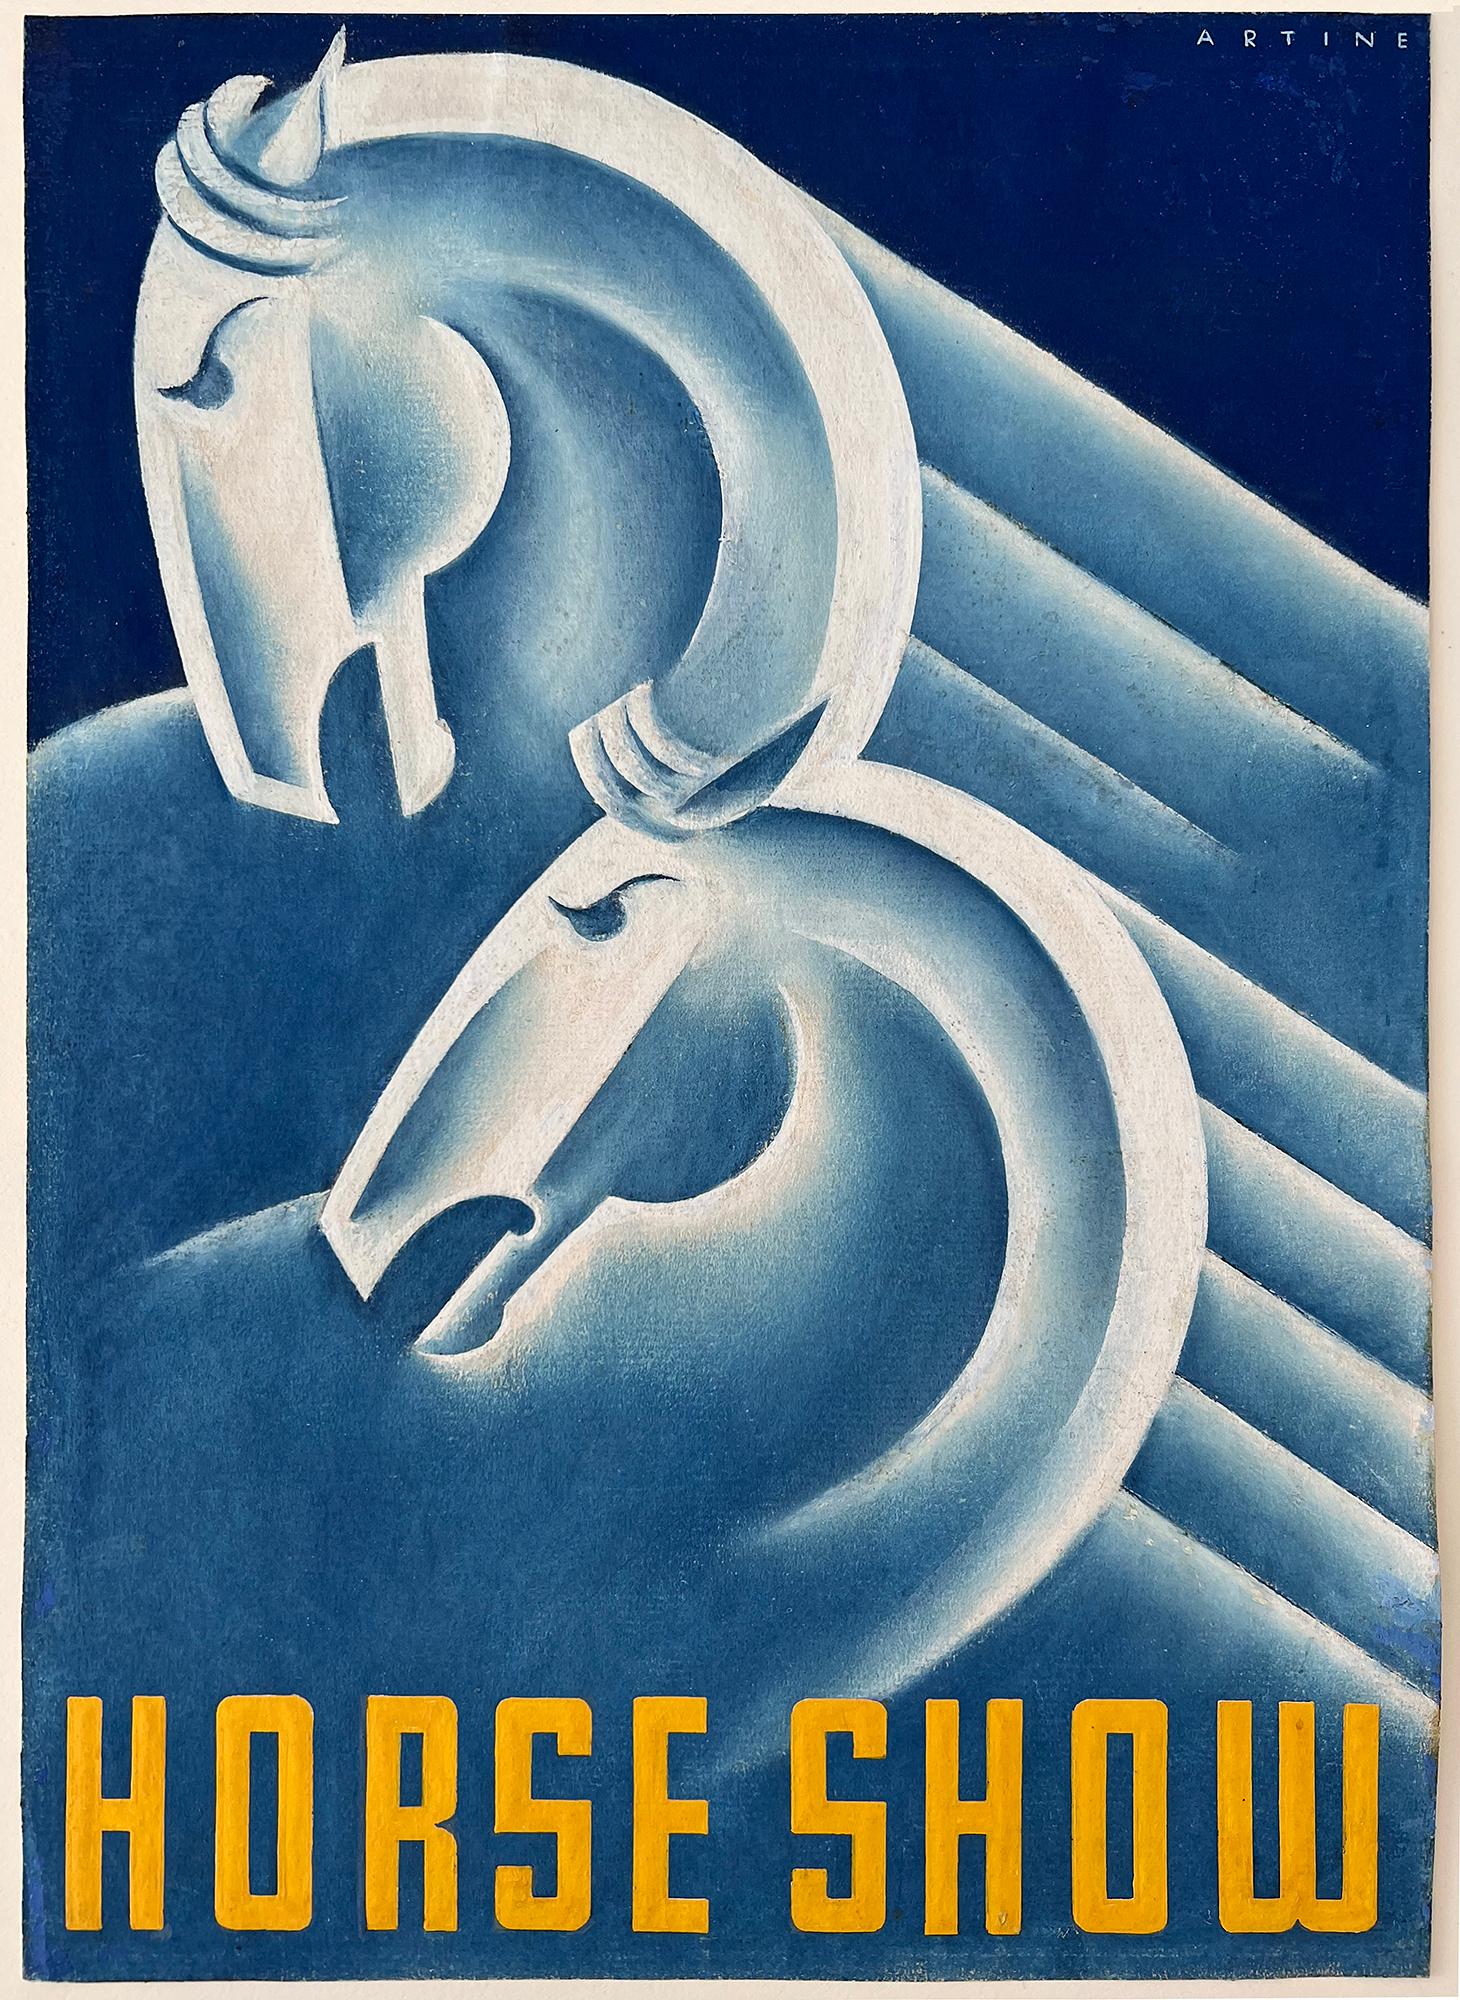 Art Deco Horses in Blue - Horse Show Illustration by Female Illustrator  - Painting by Robin Artine Smith